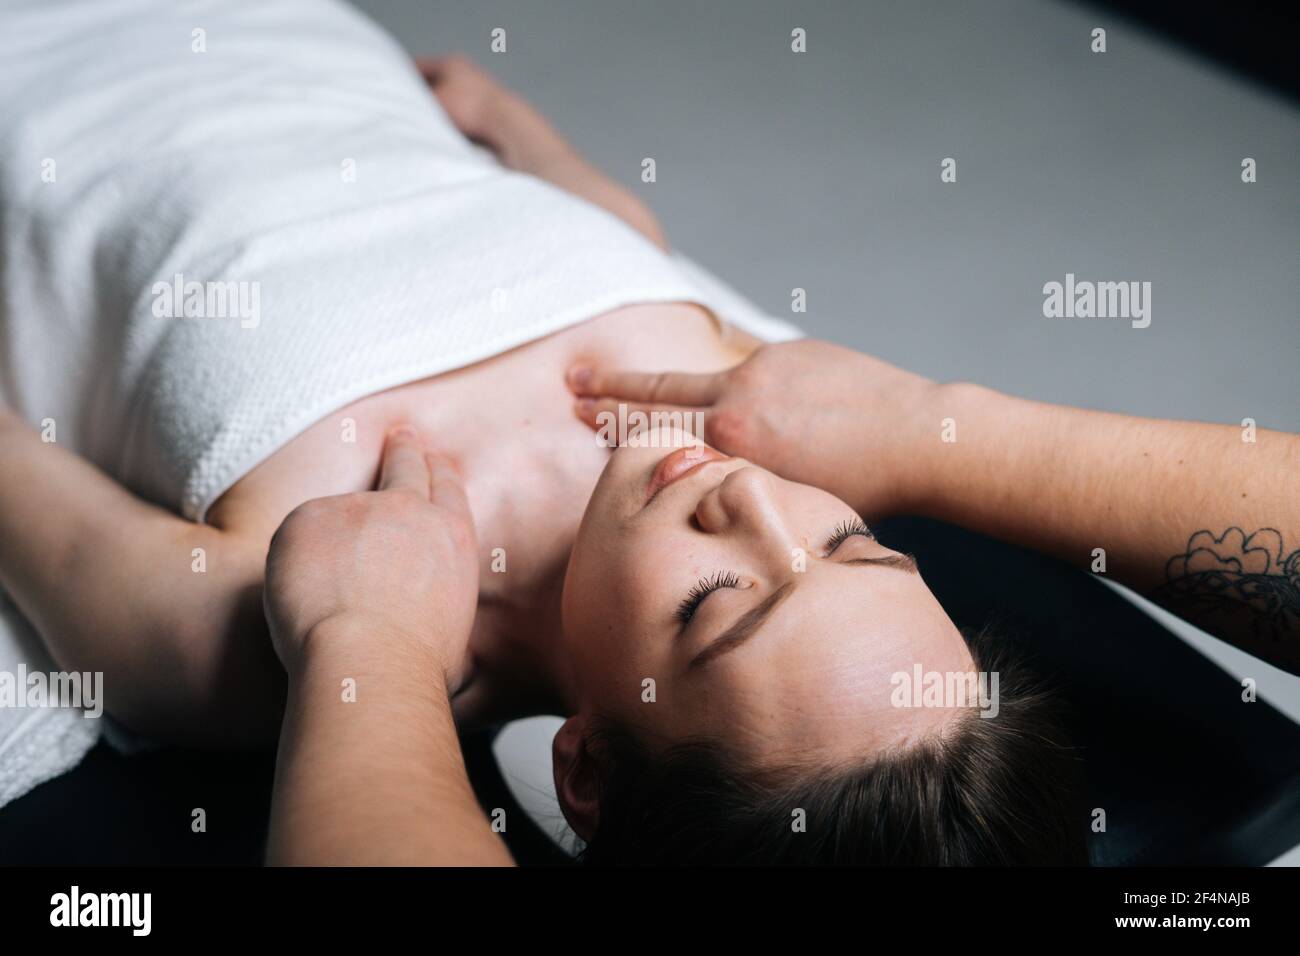 Close-up top view of young woman lying down on massage table during shoulder and neck massage Stock Photo